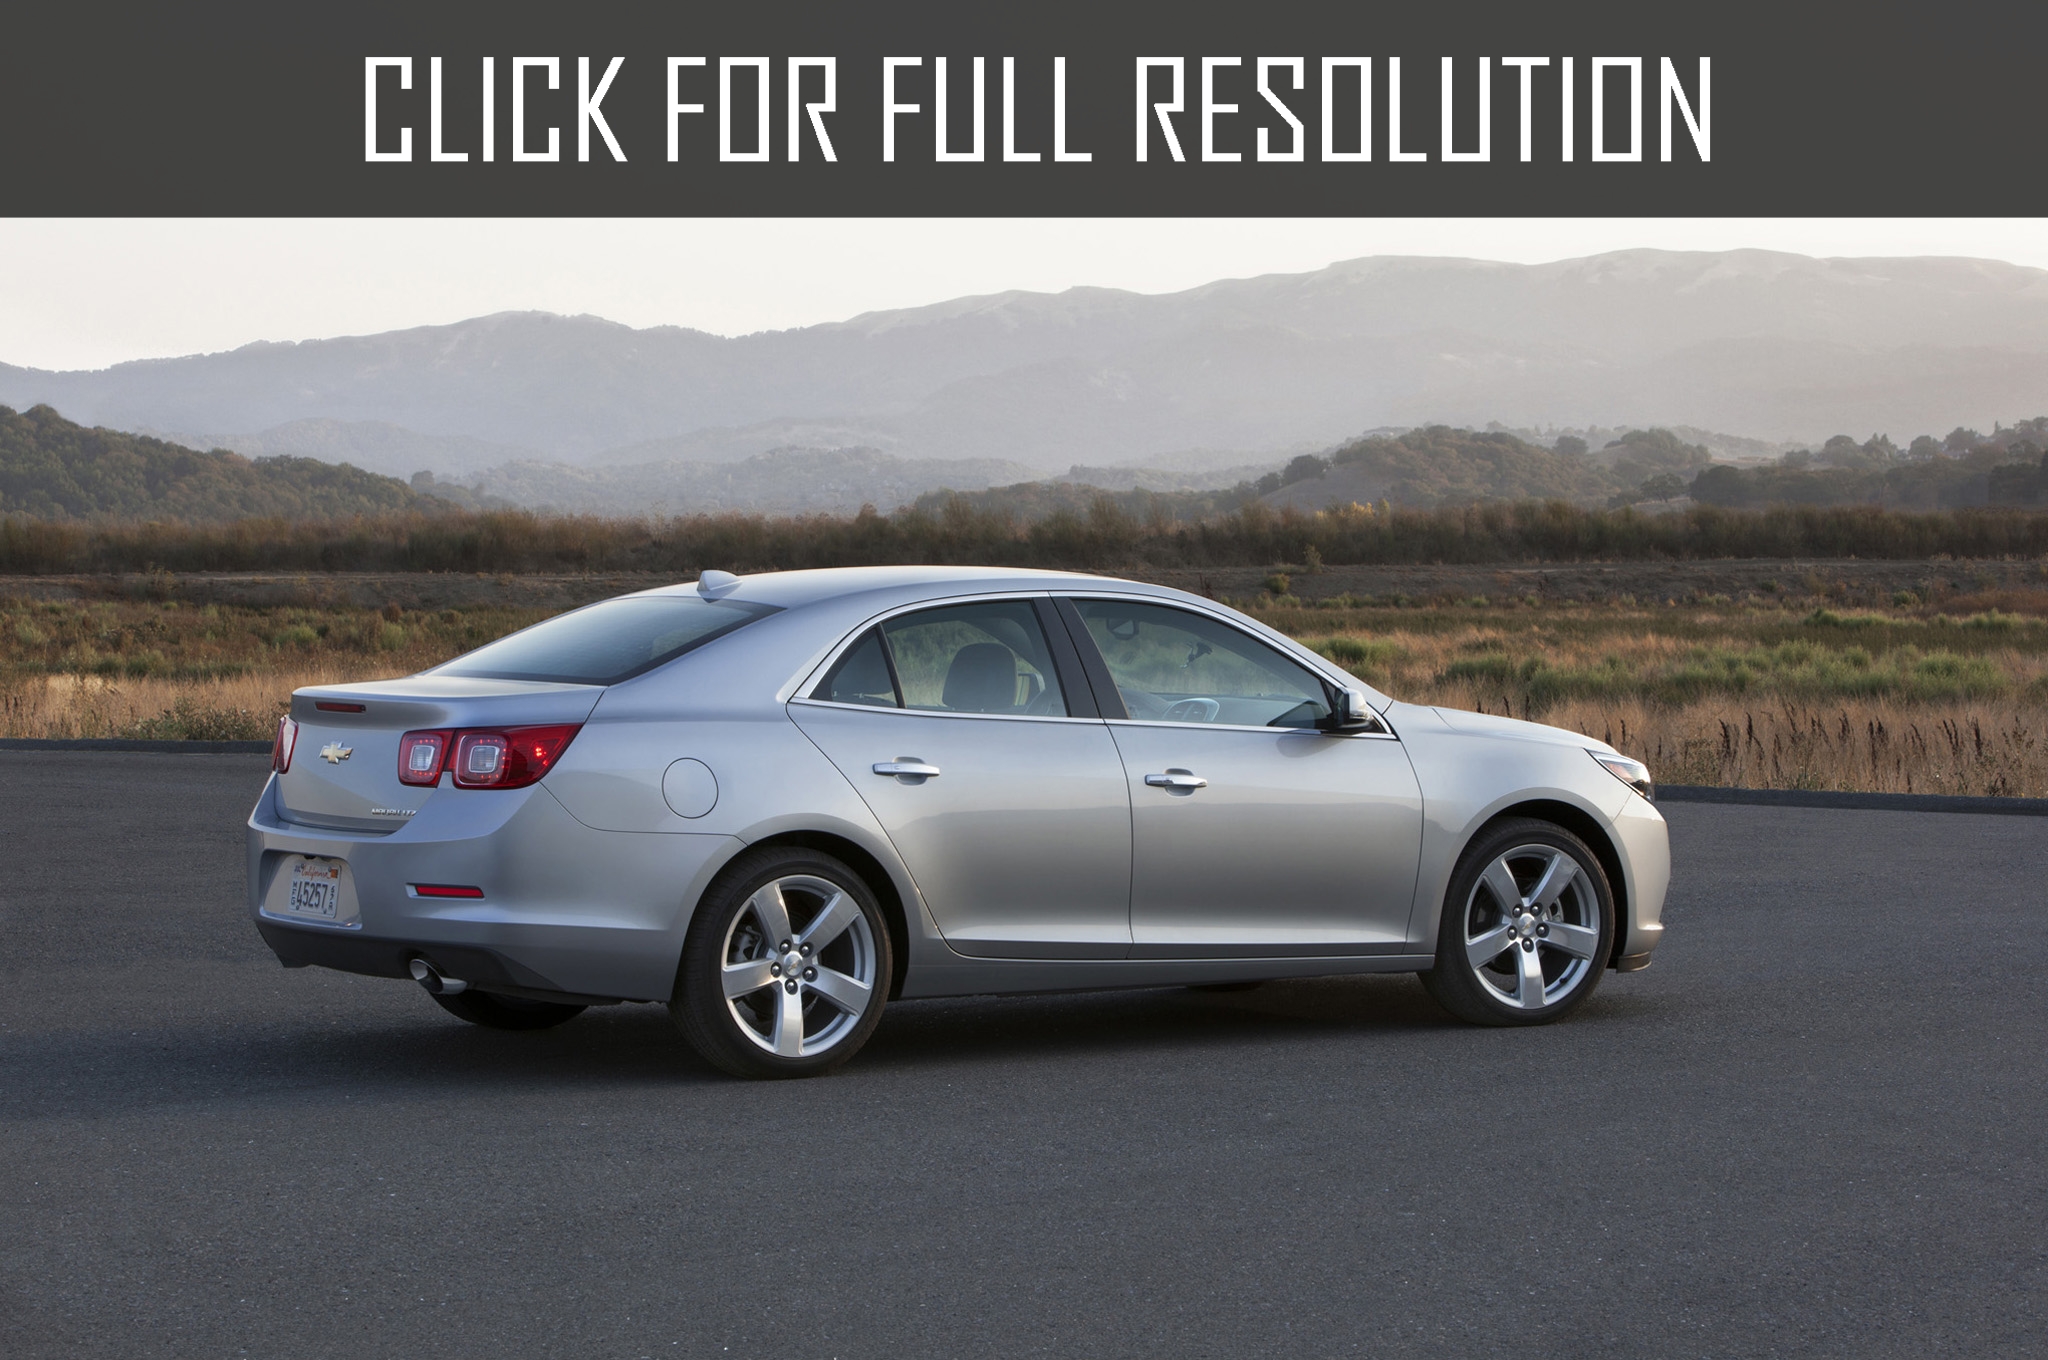 Chevrolet Malibu Ls 2013 - amazing photo gallery, some information and specifications, as well